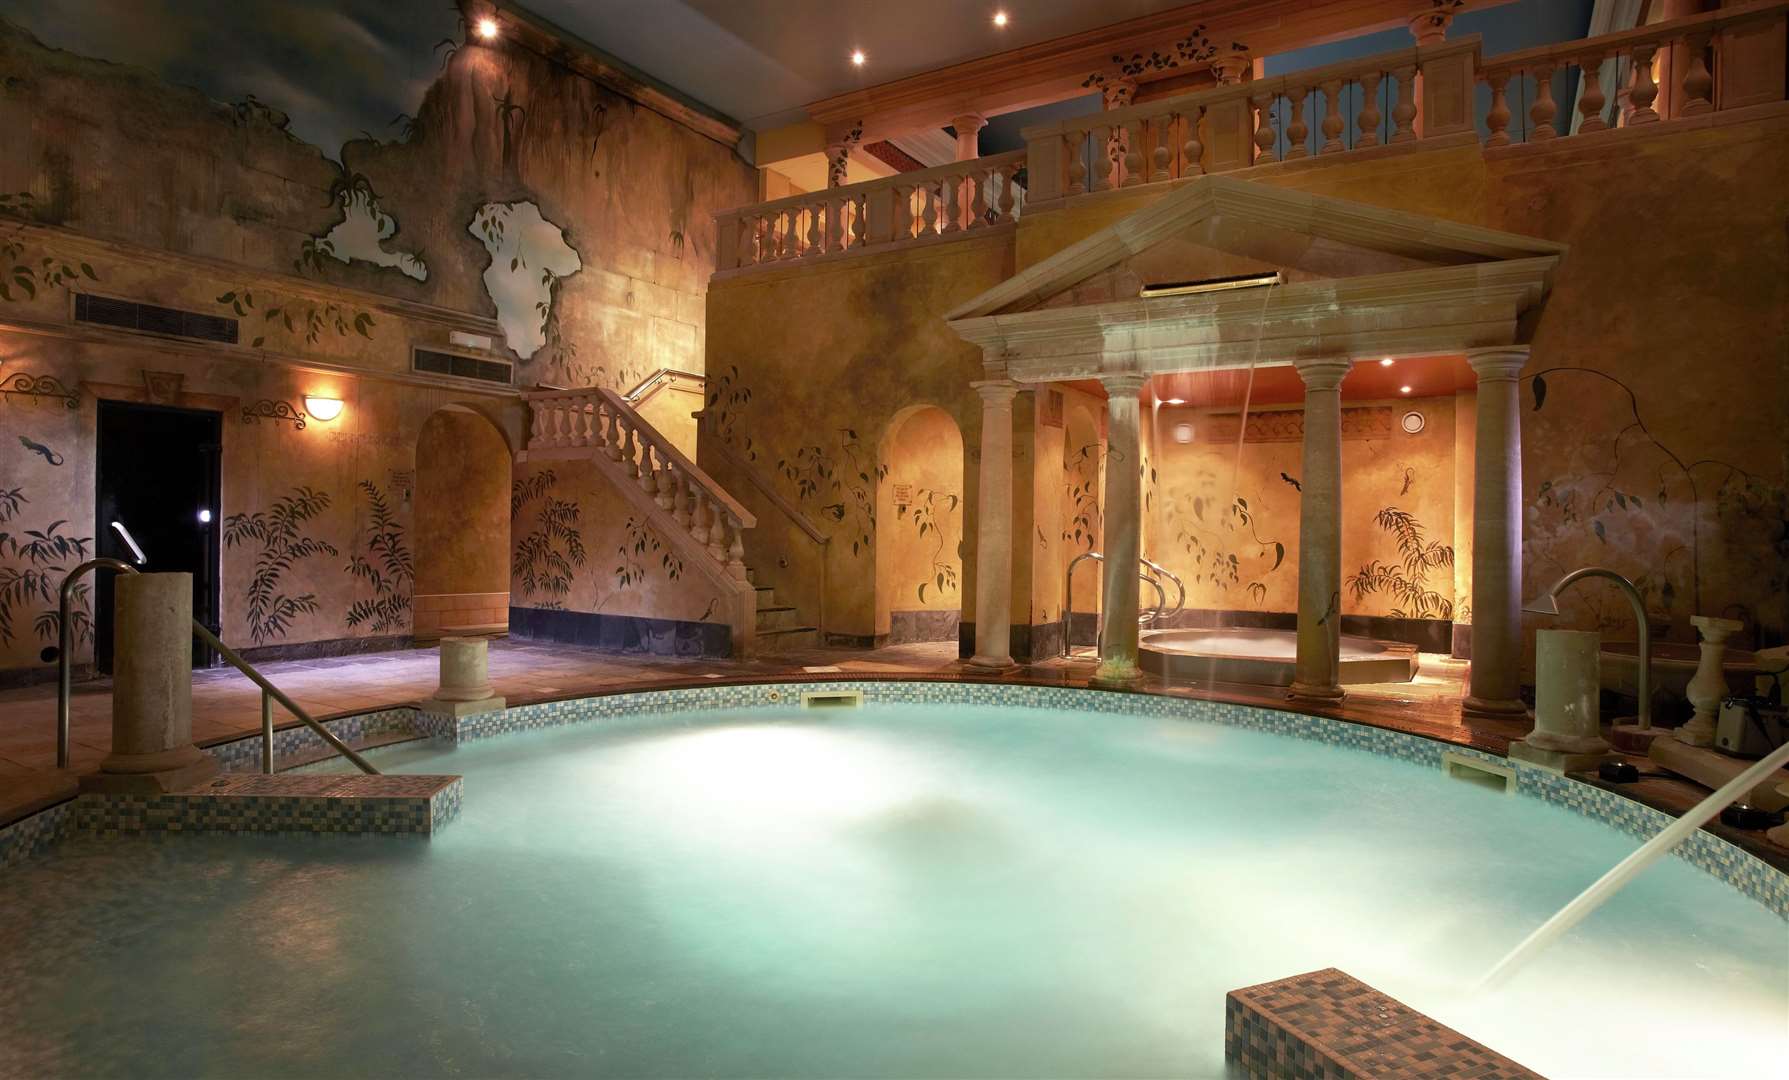 Rowhill Grange’s Roman bath-style spa is beautifully decorated. Picture: Blueprintx